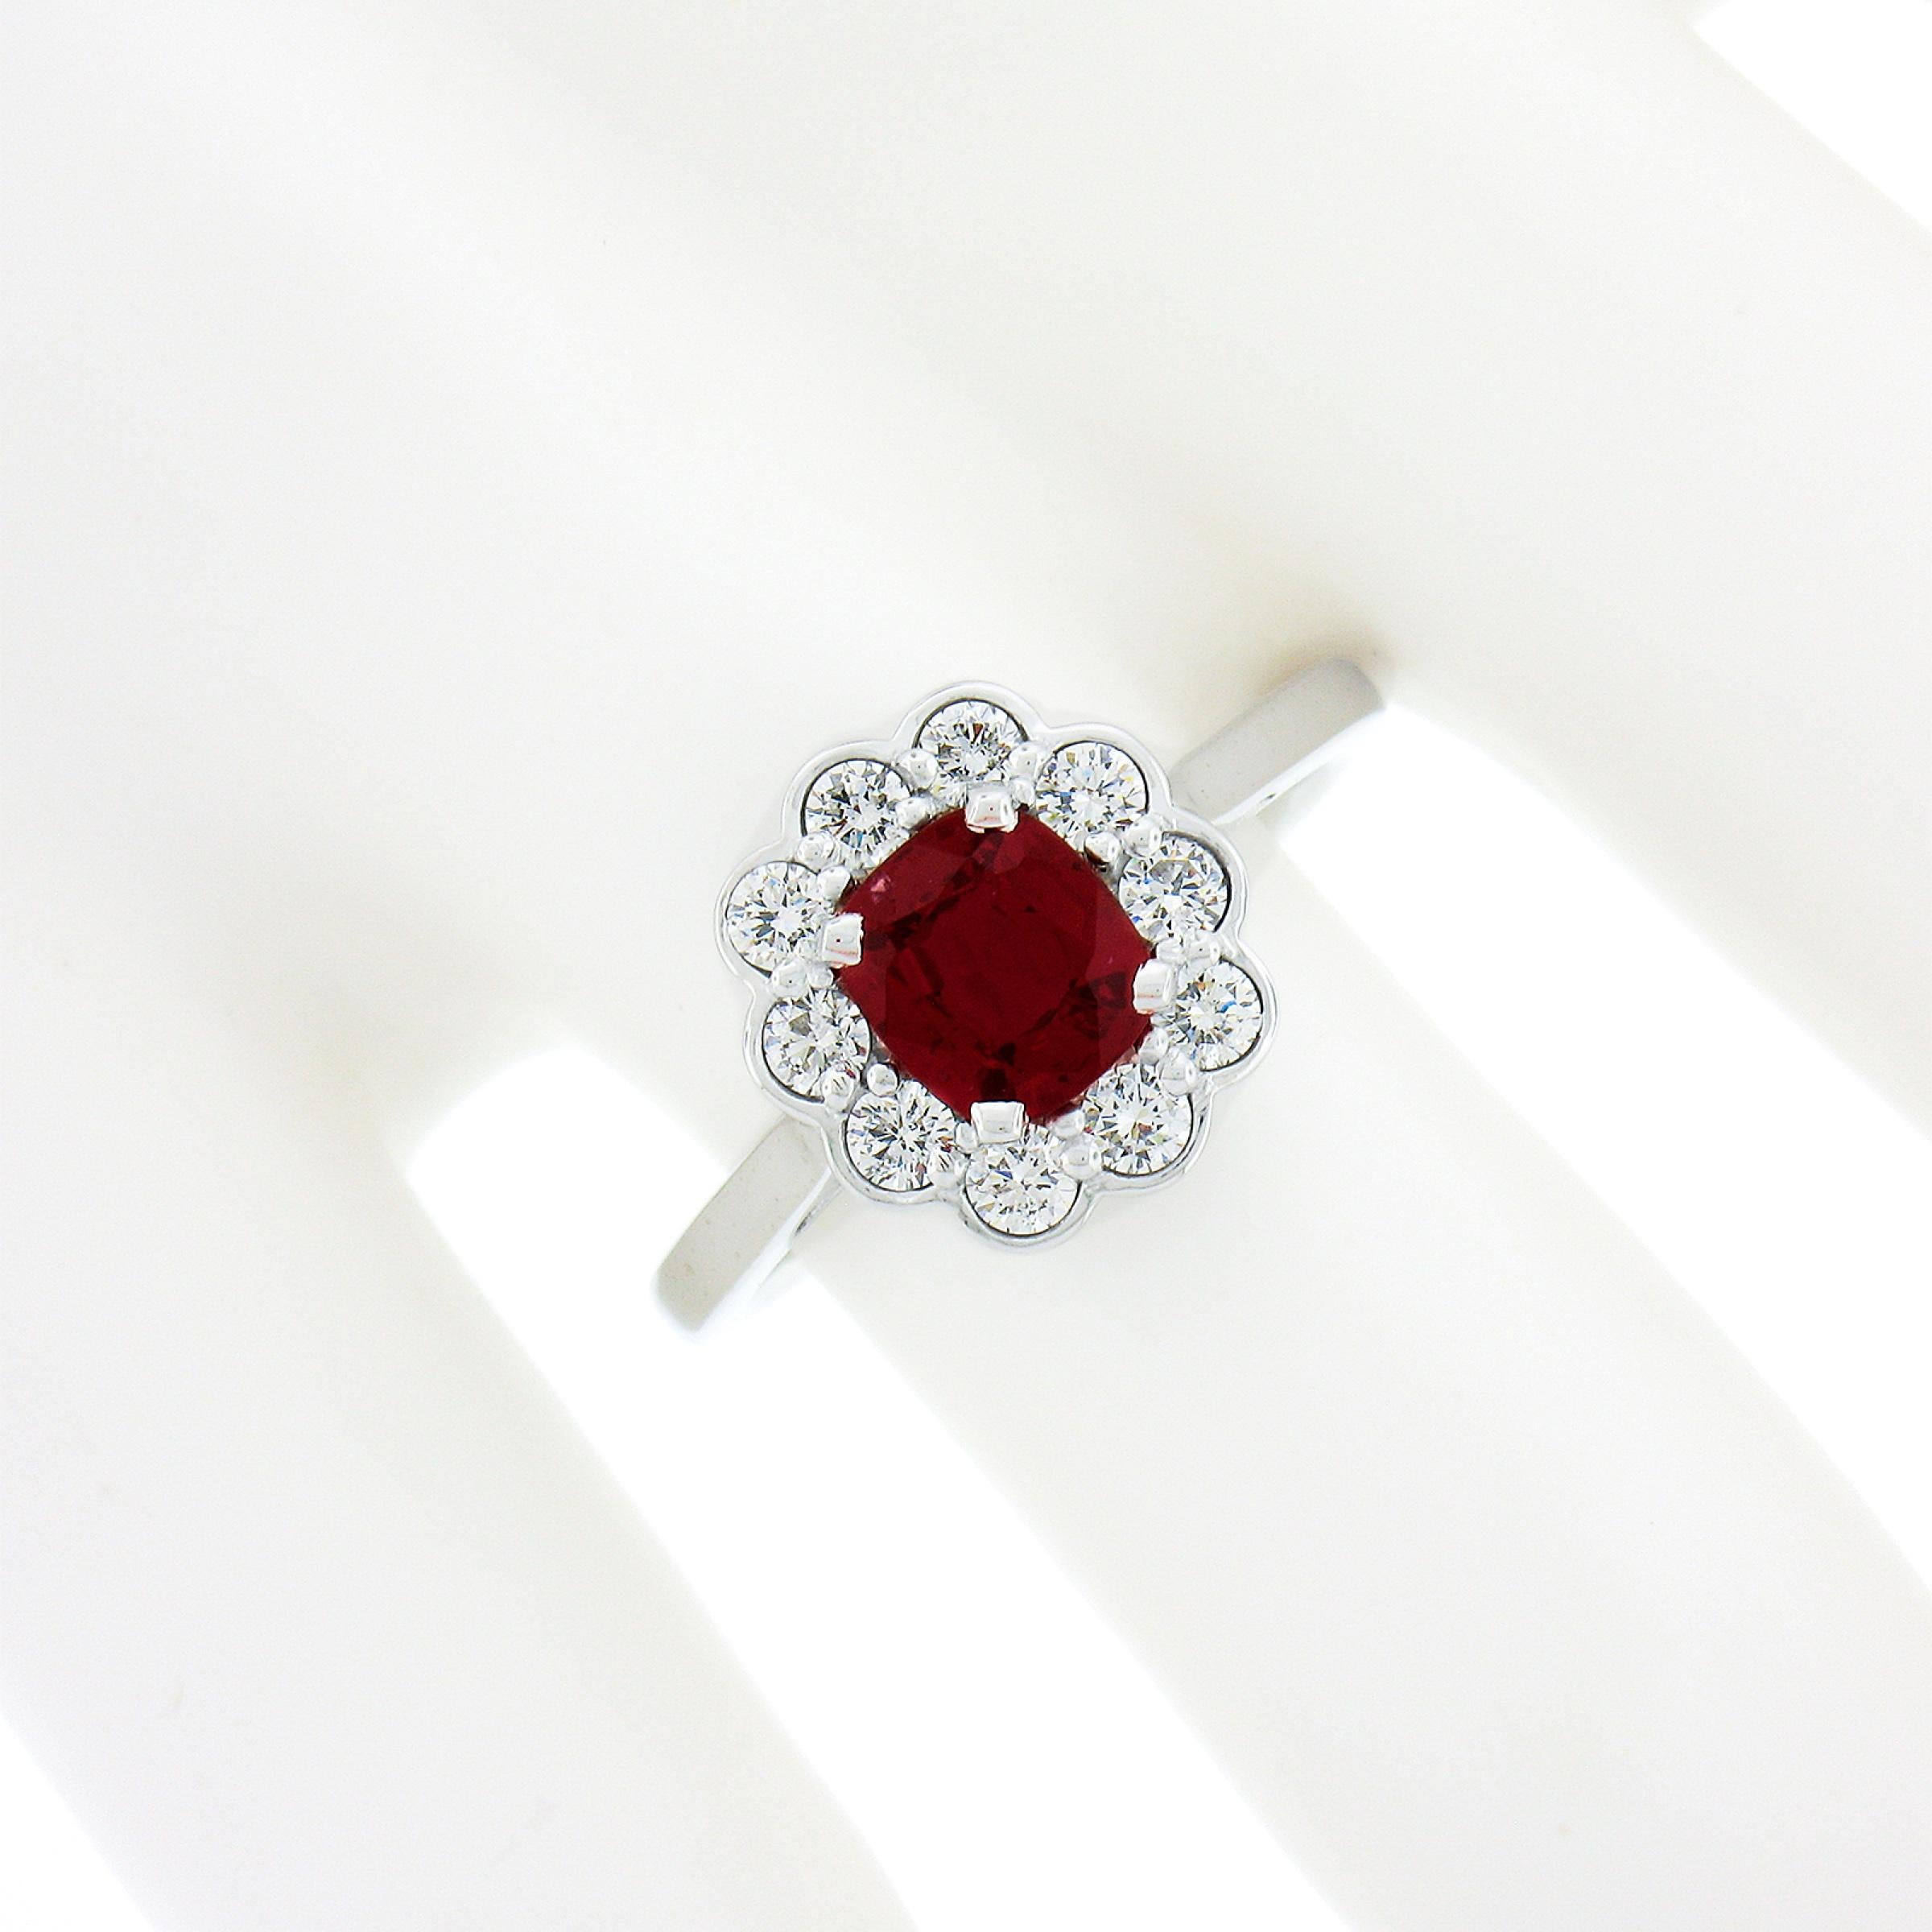 Platinum 1.35ctw GIA BURMA NO HEAT Cushion VIVID RED Spinel Diamond Halo Ring In New Condition For Sale In Montclair, NJ